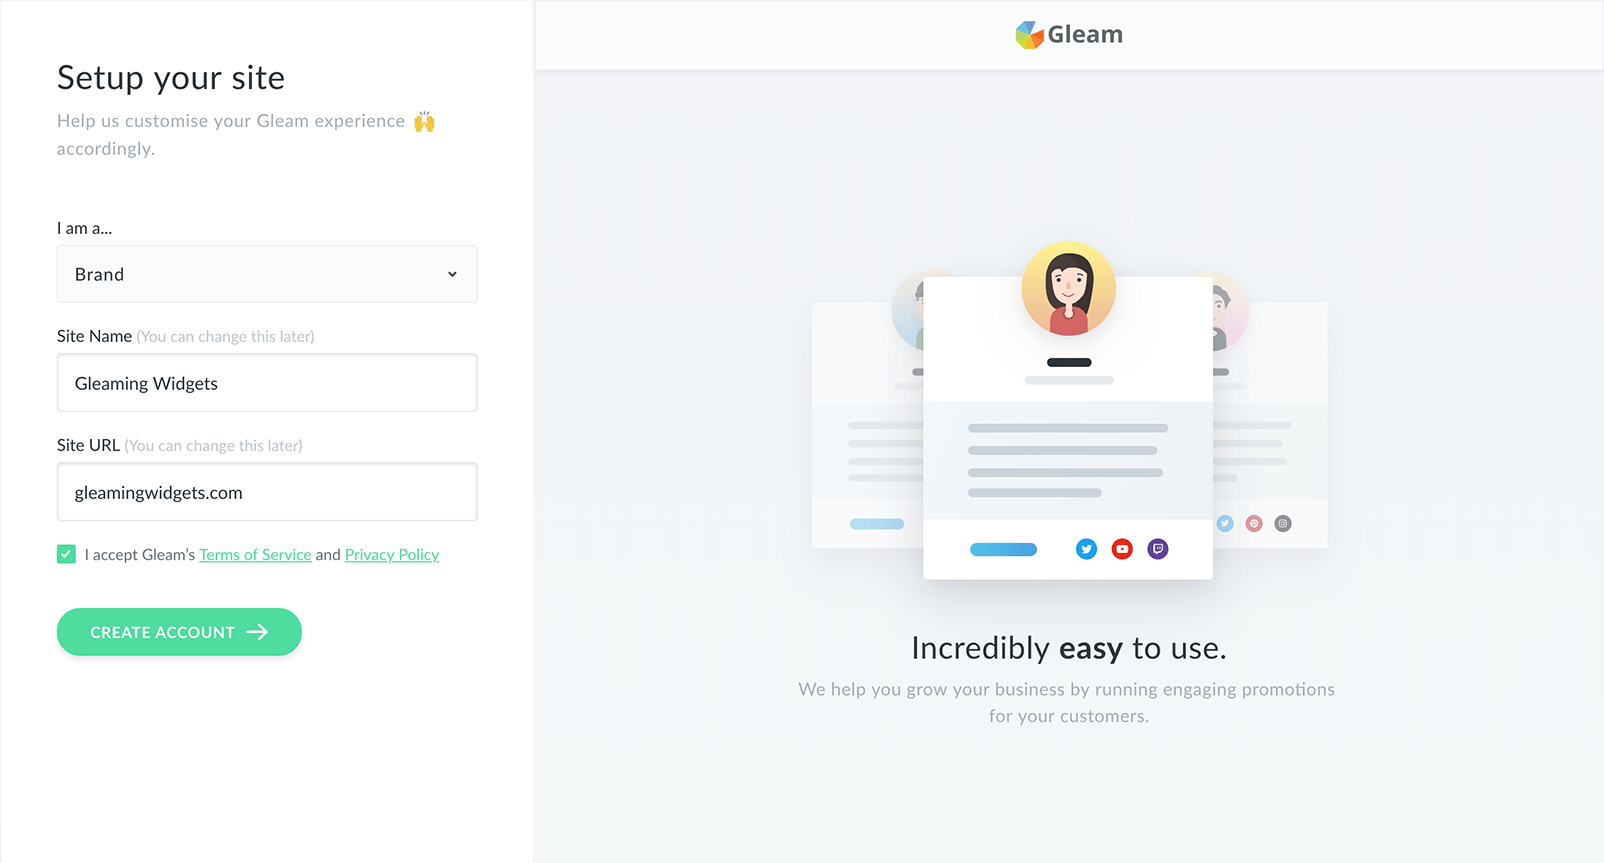 Authenticate your Shopify account to connect with Gleam.io